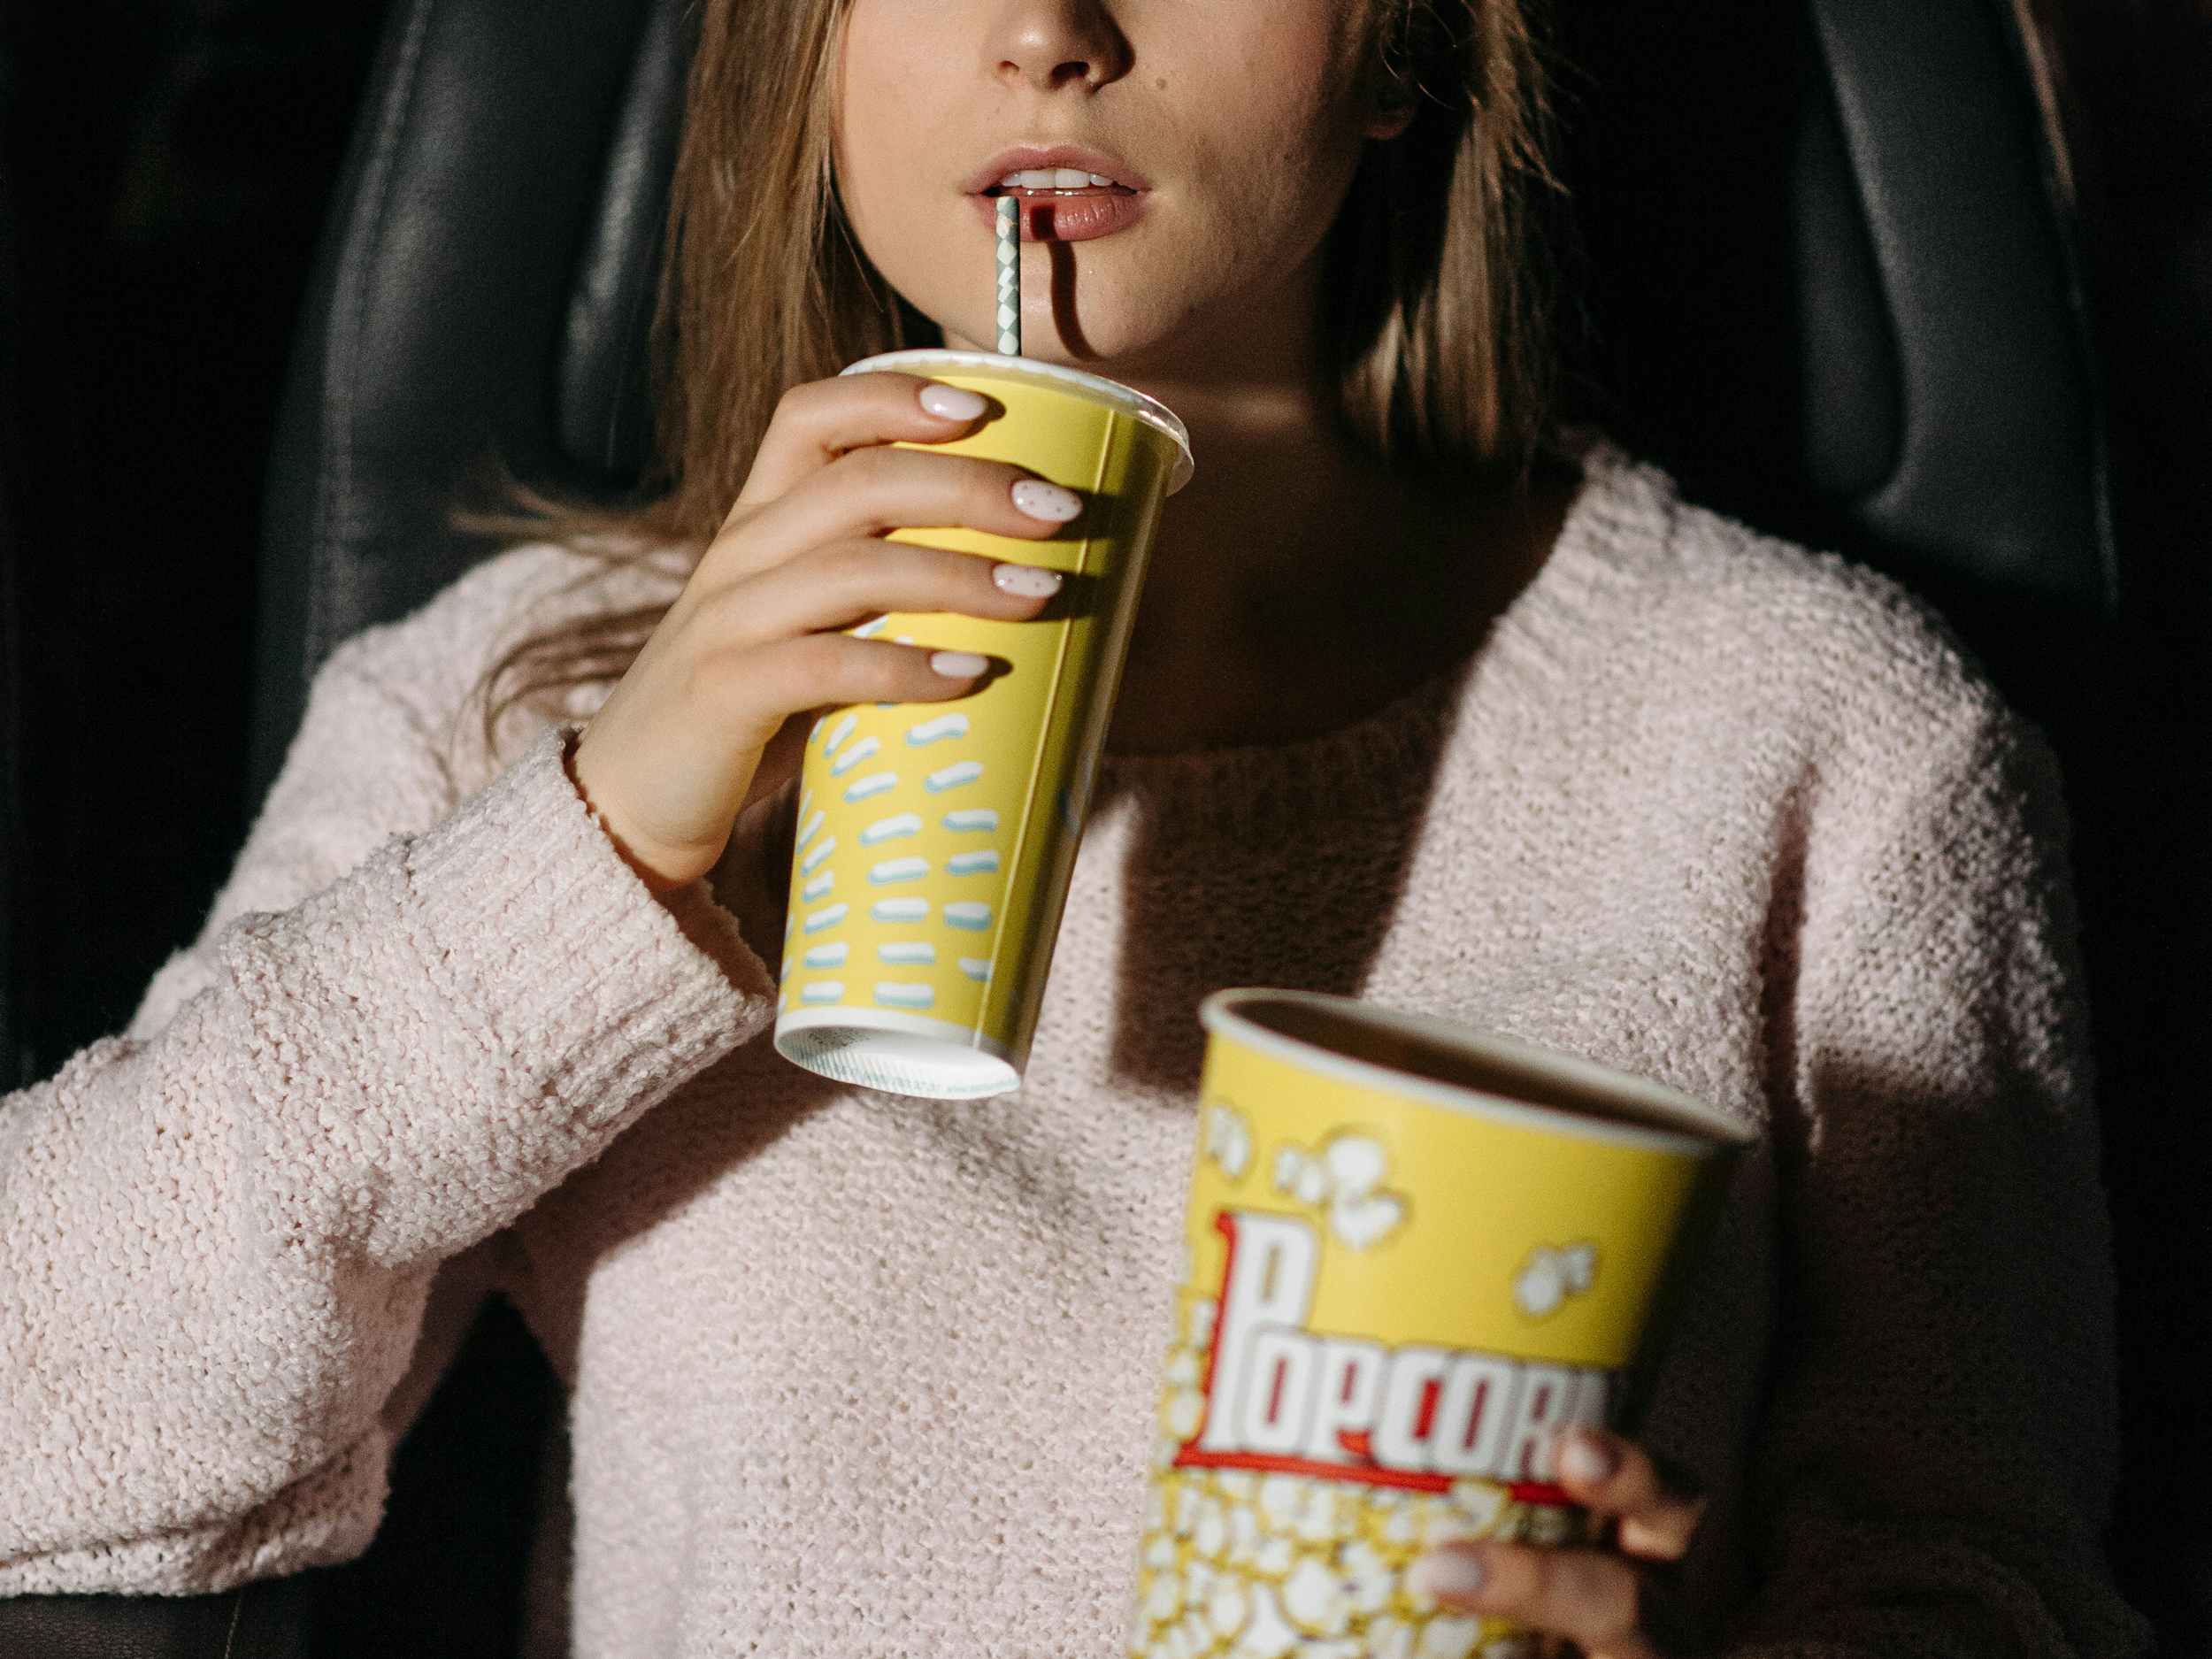 person in a movie theater drinking a soda and holding popcorn